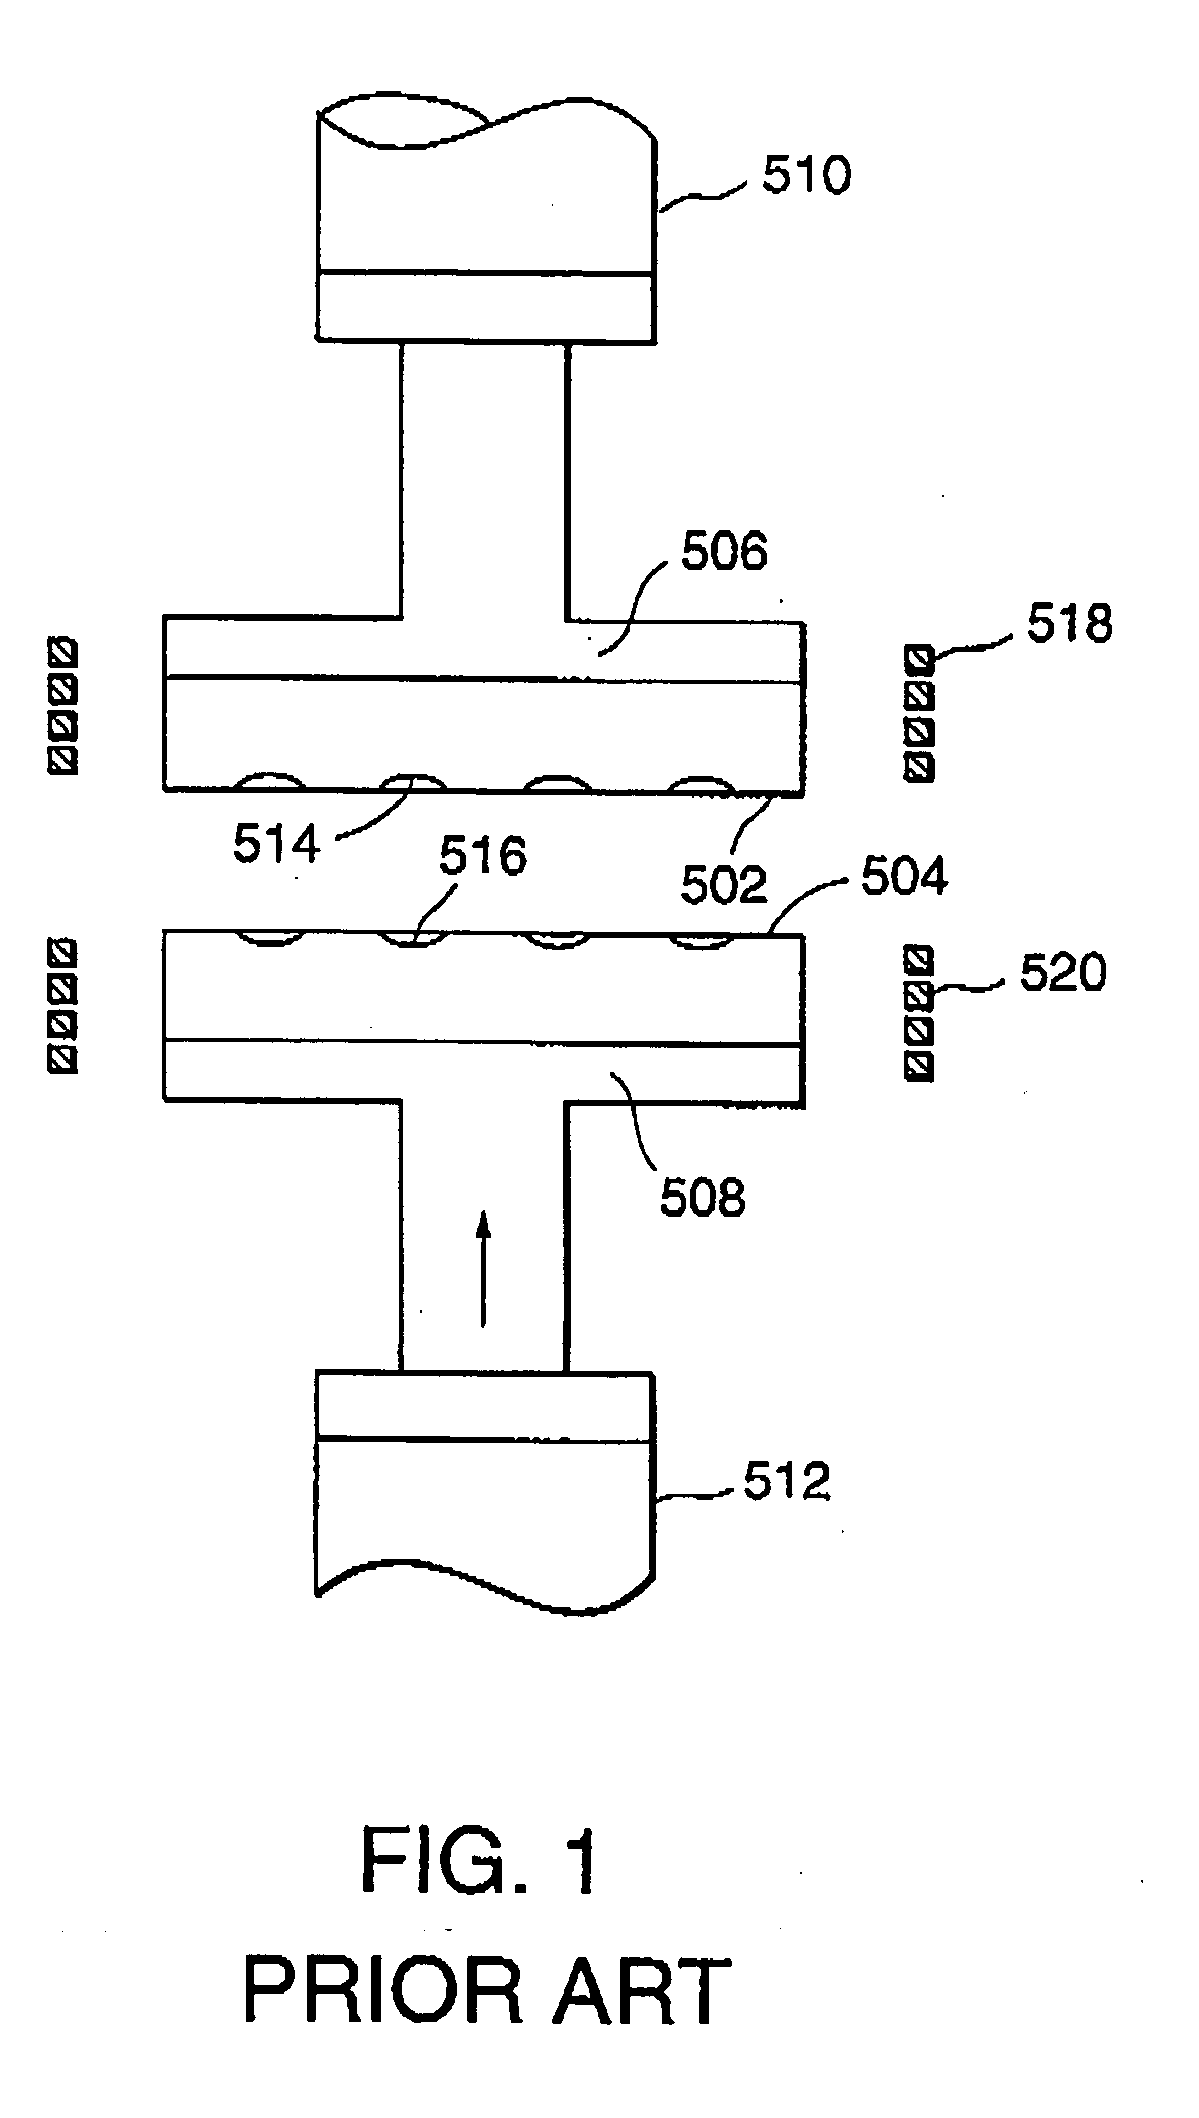 Press molding apparatus and method of producing a glass optical element using the apparatus